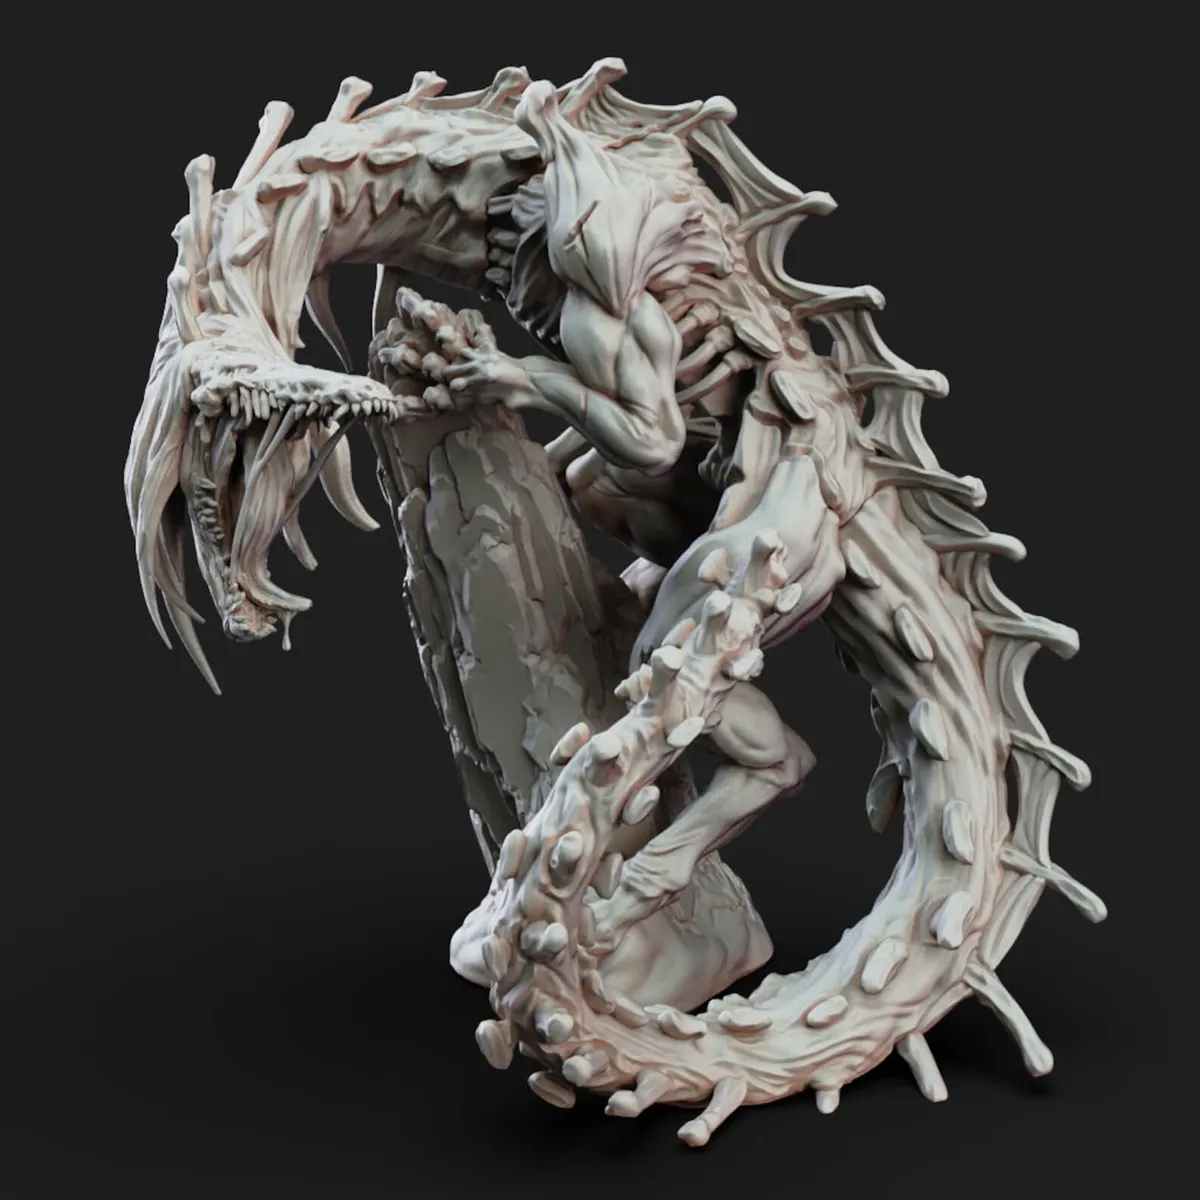 SCP-682 - HARD TO DESTROY REPTILE